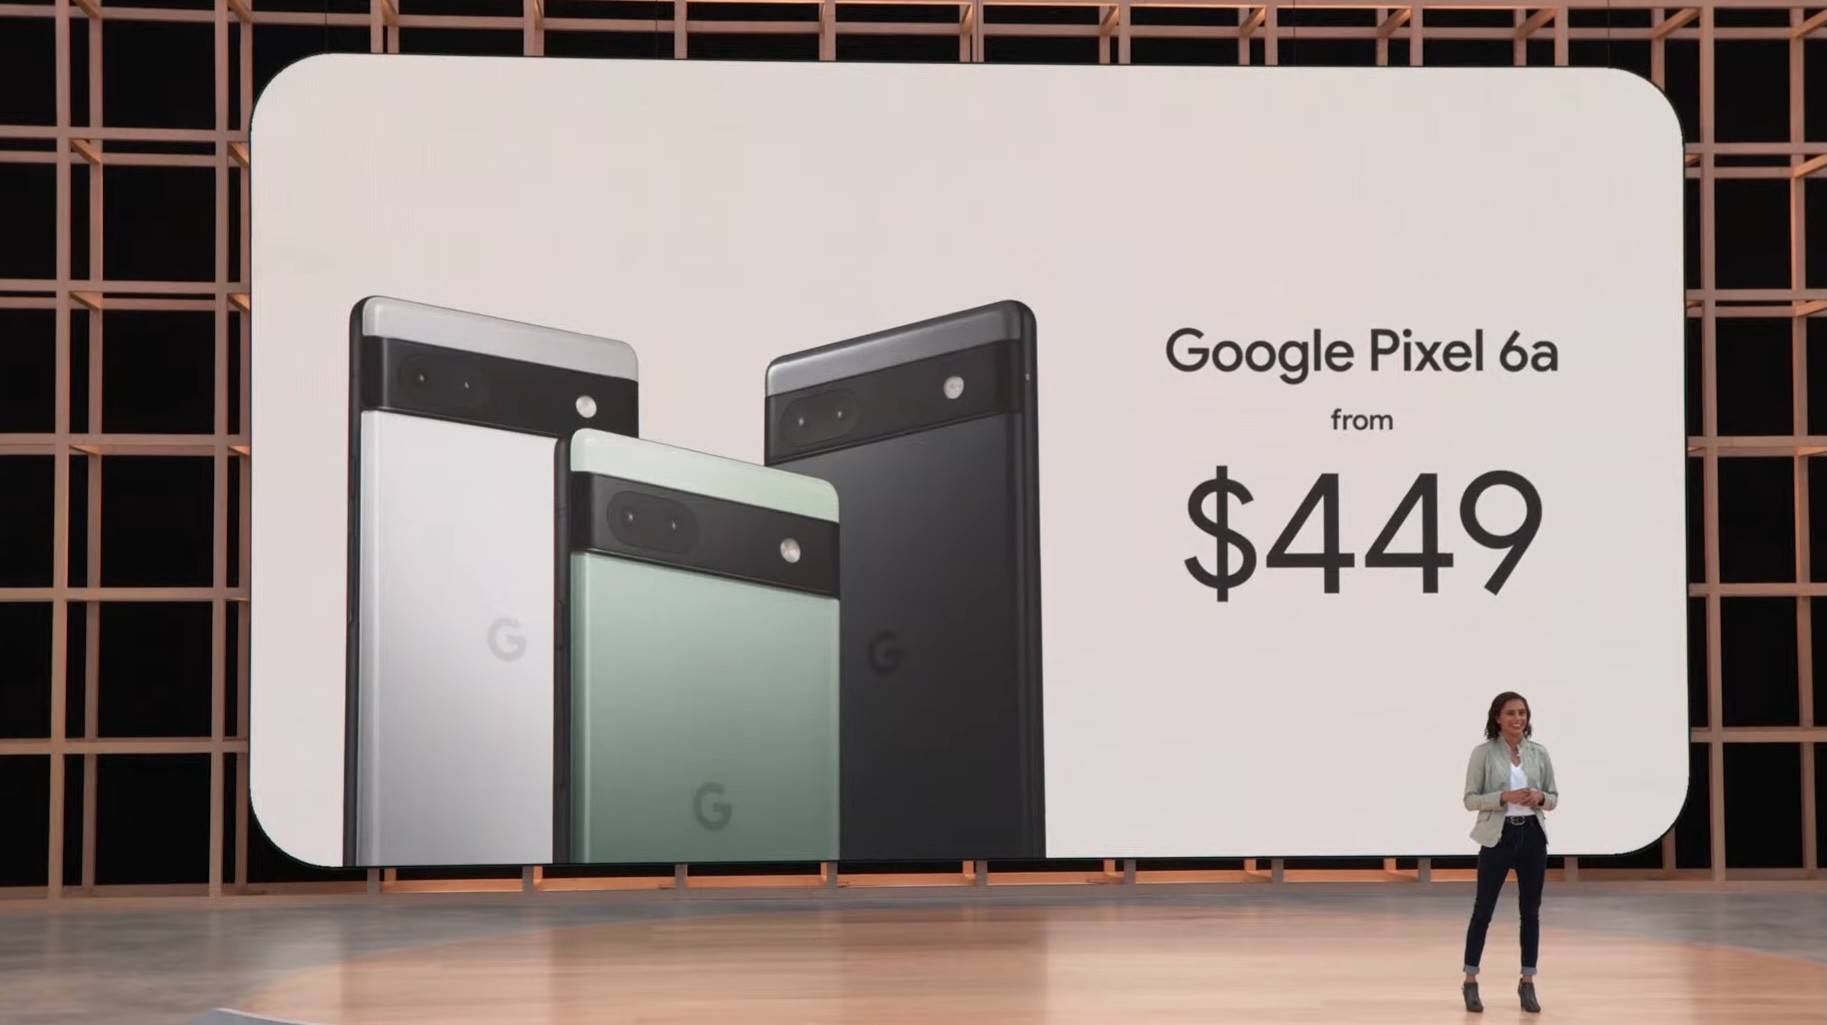 Availability of Pixel 6a prices